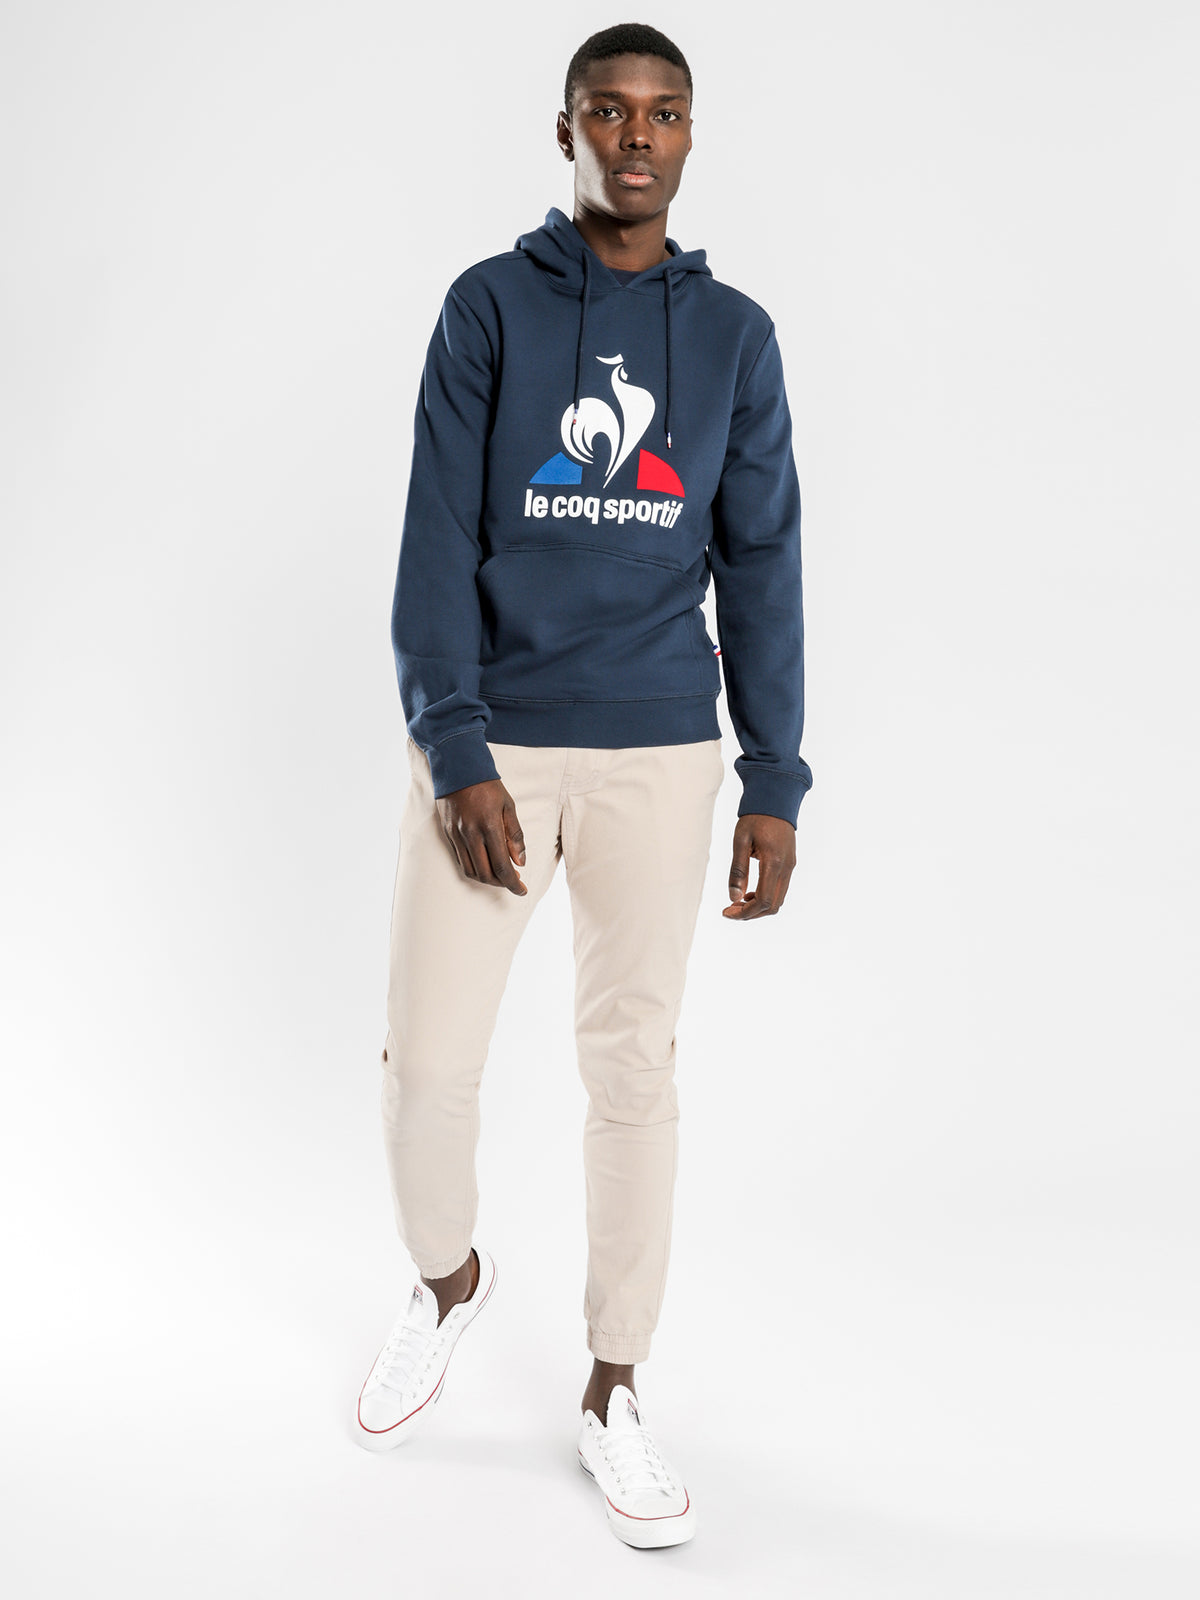 Labrit Hooded Sweater in Navy